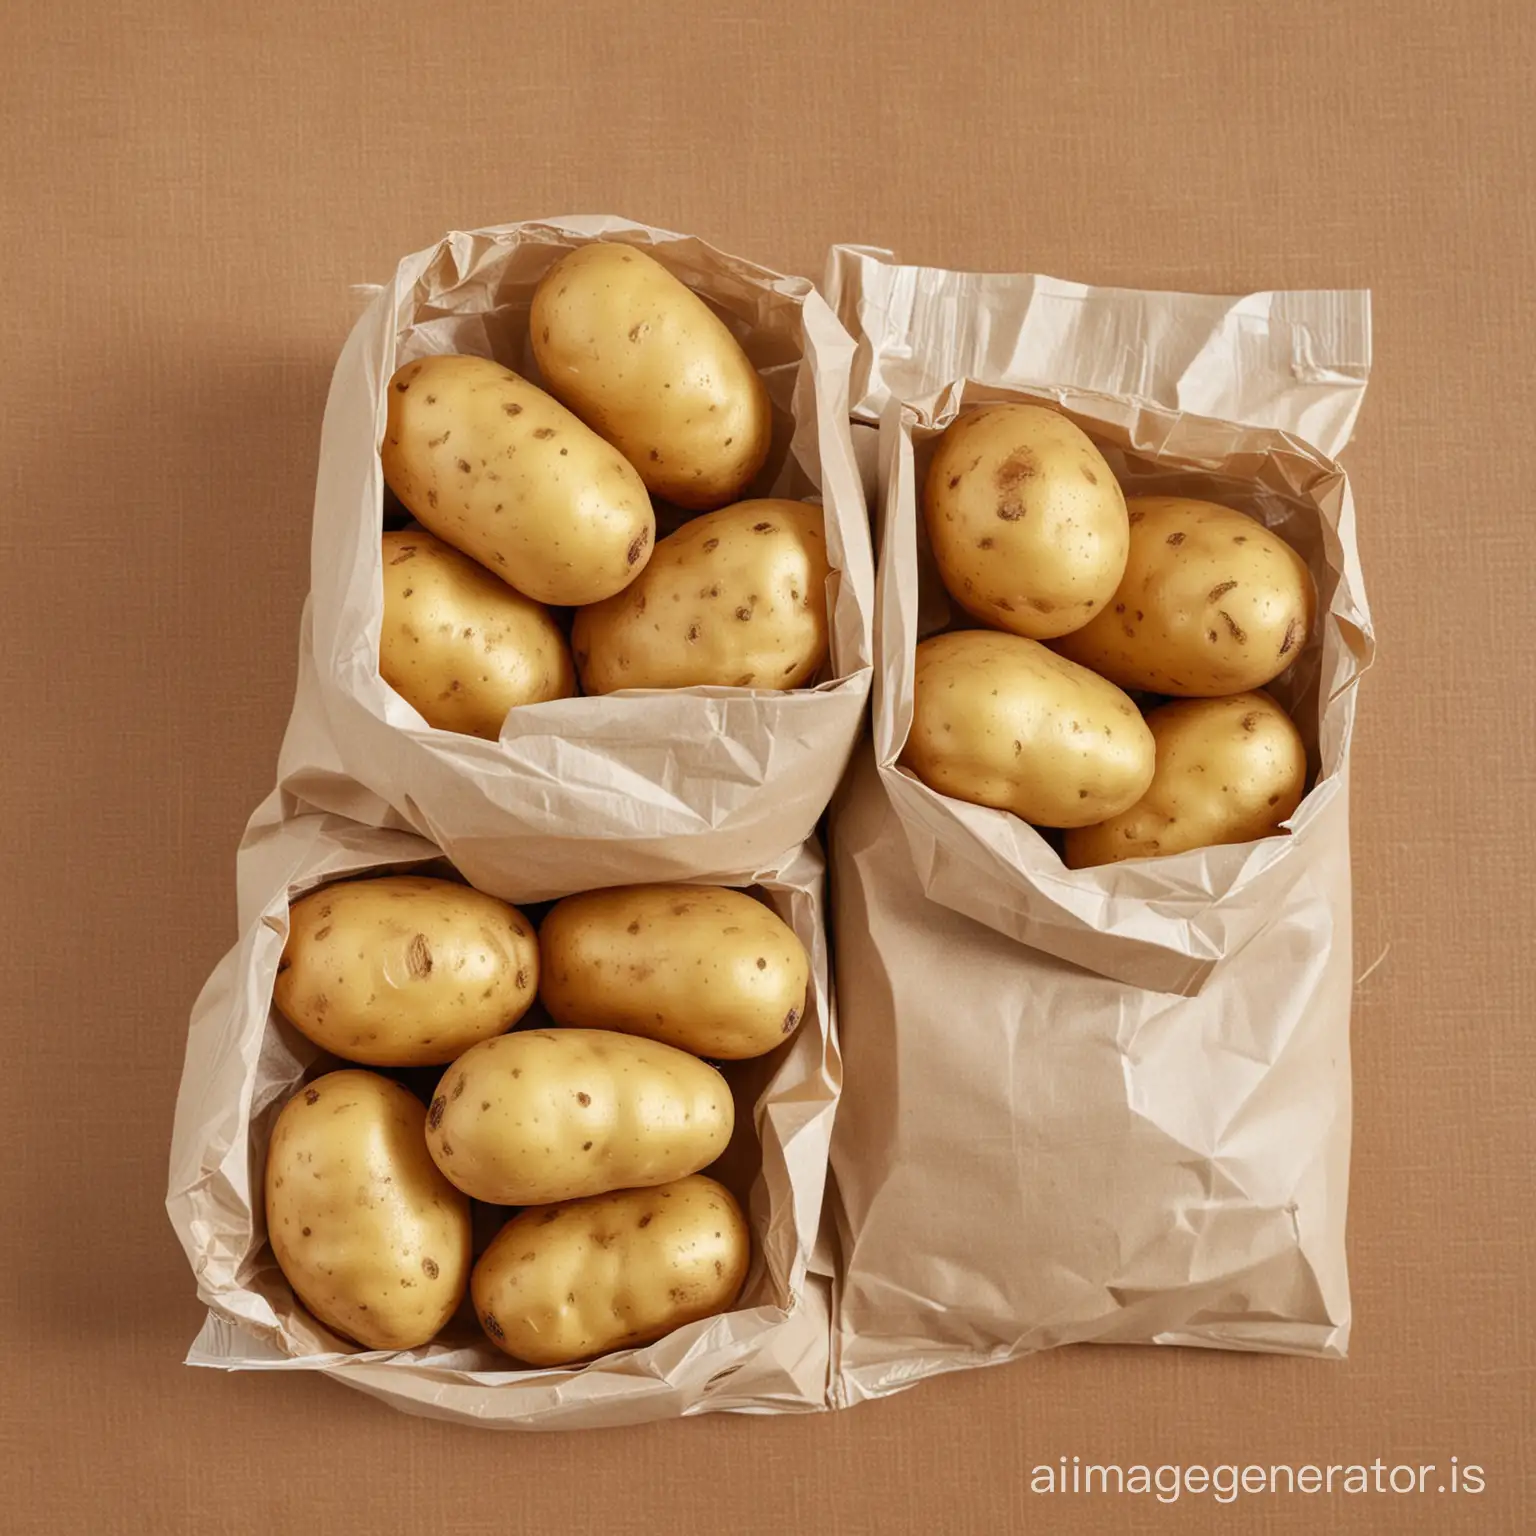 Potato in packing bags